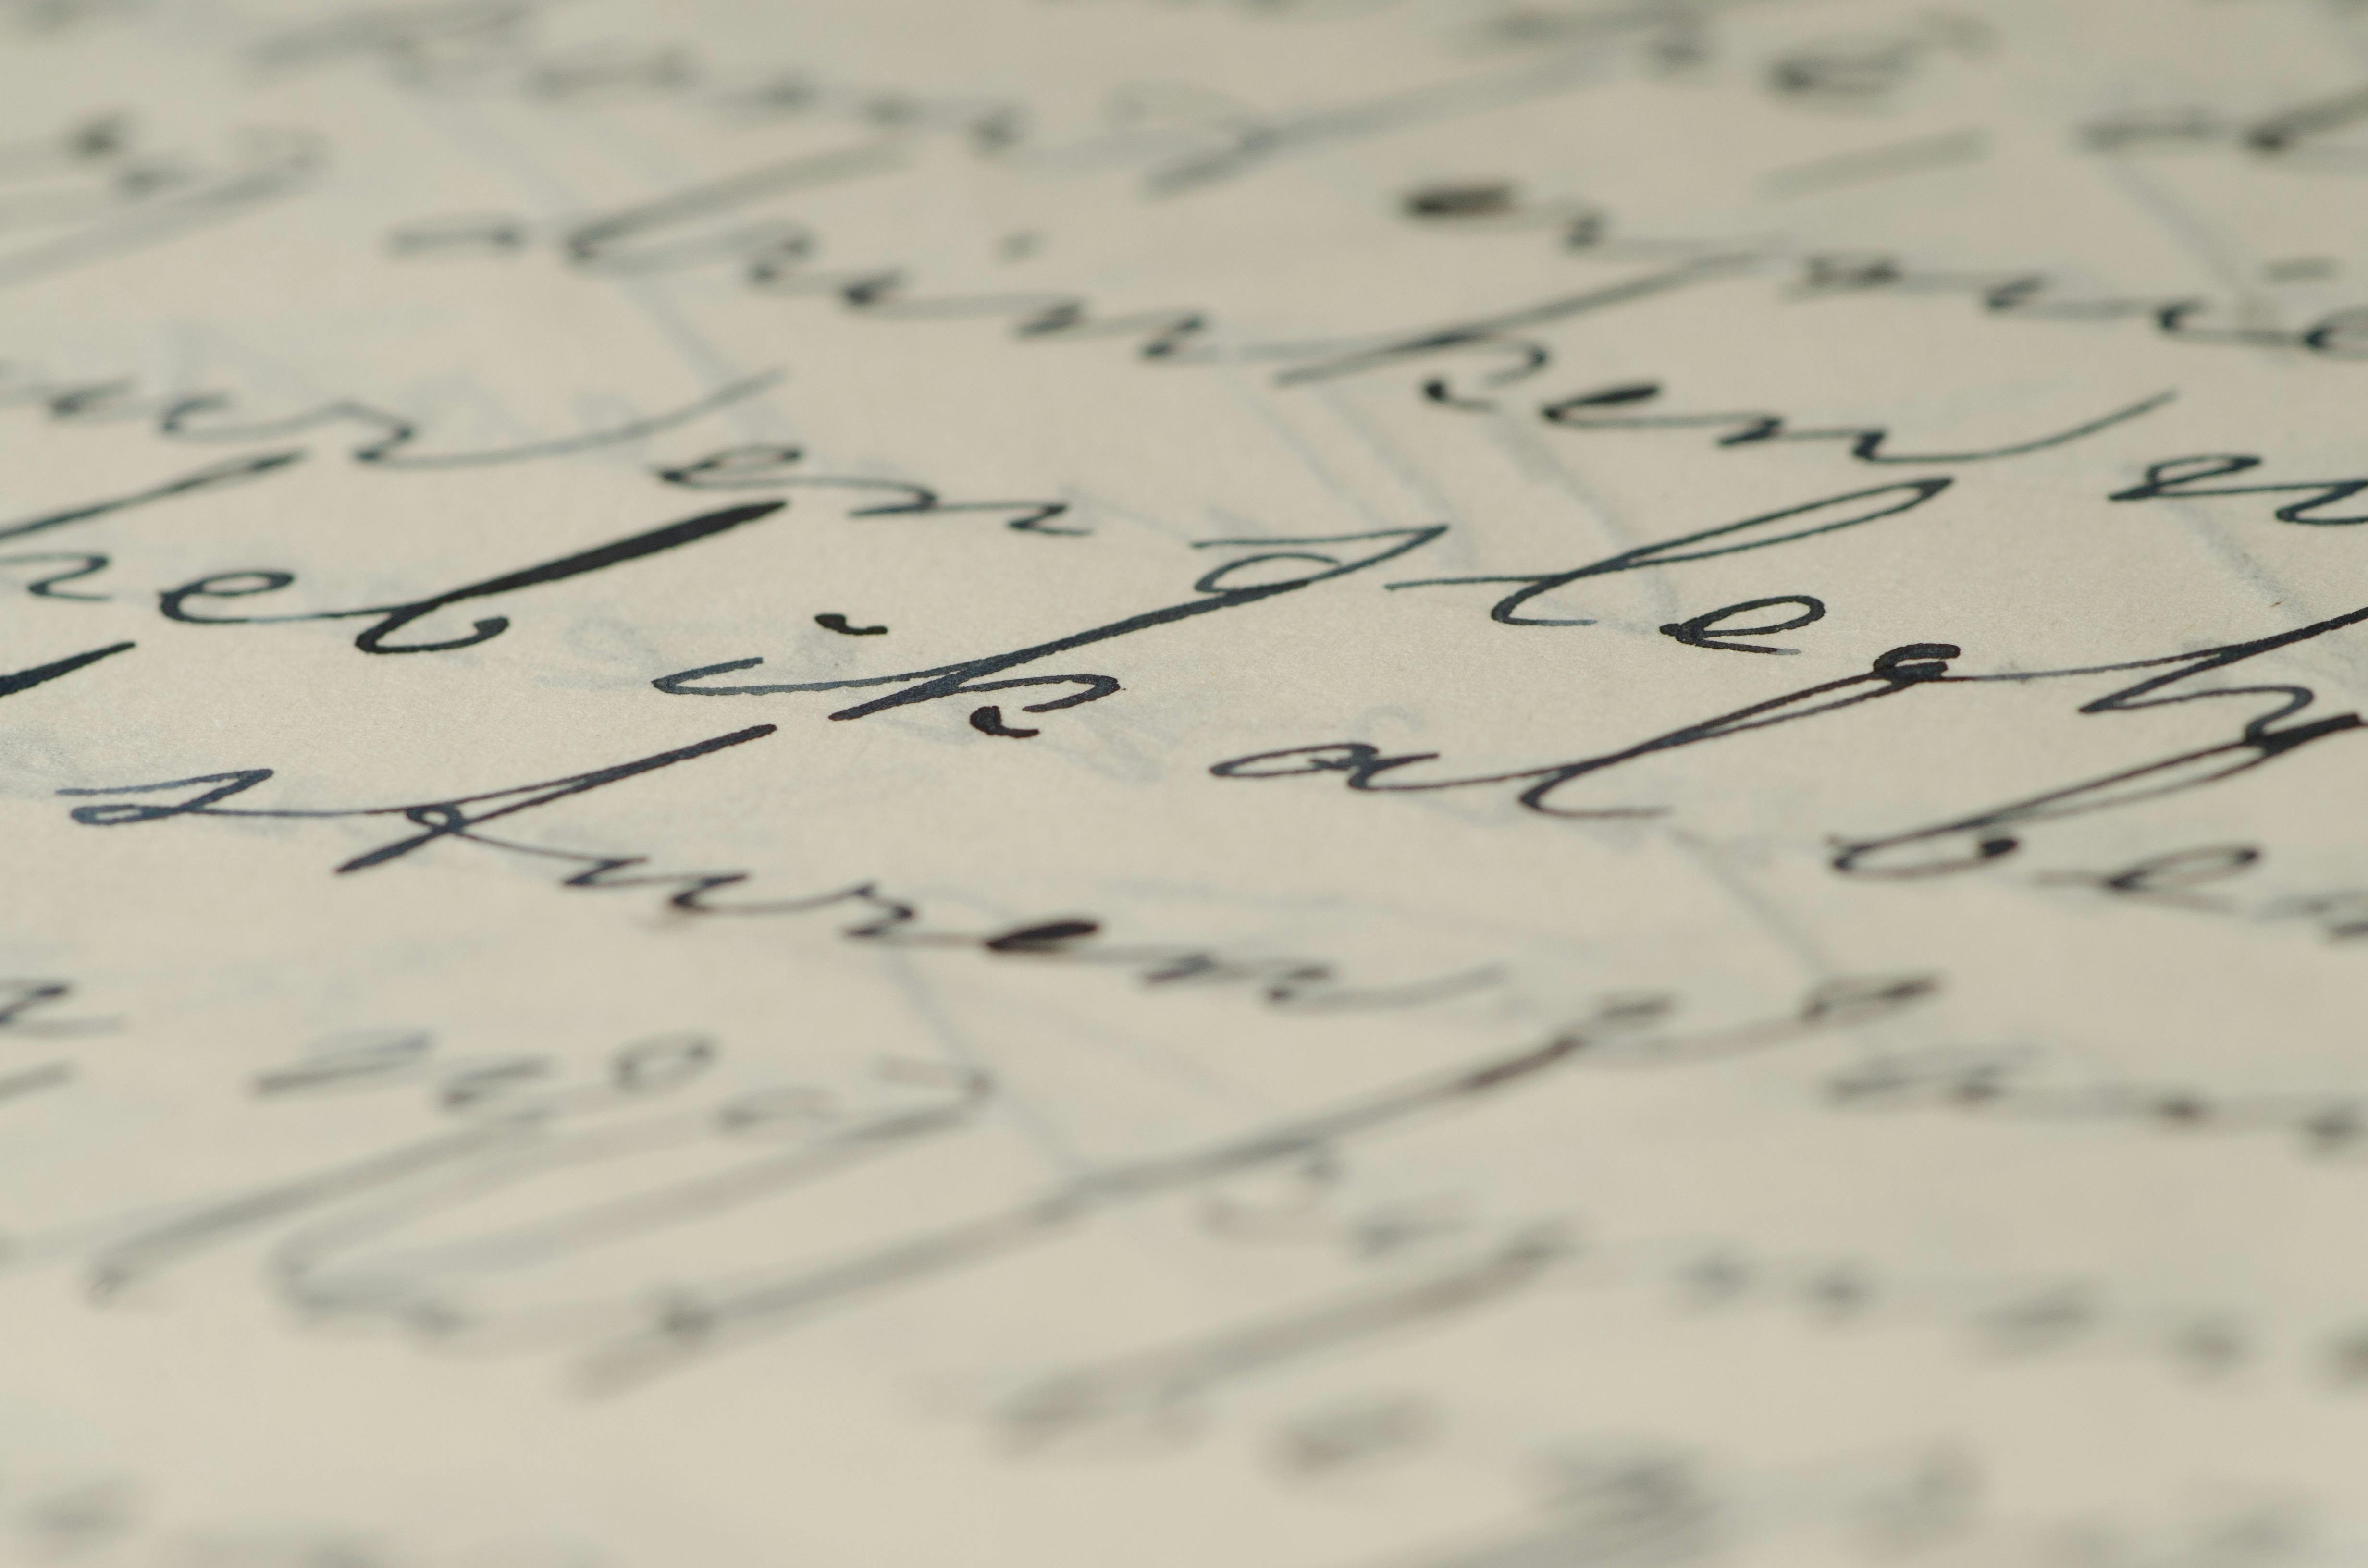 Words in a letter. For illustration purposes only | Source: Pexels